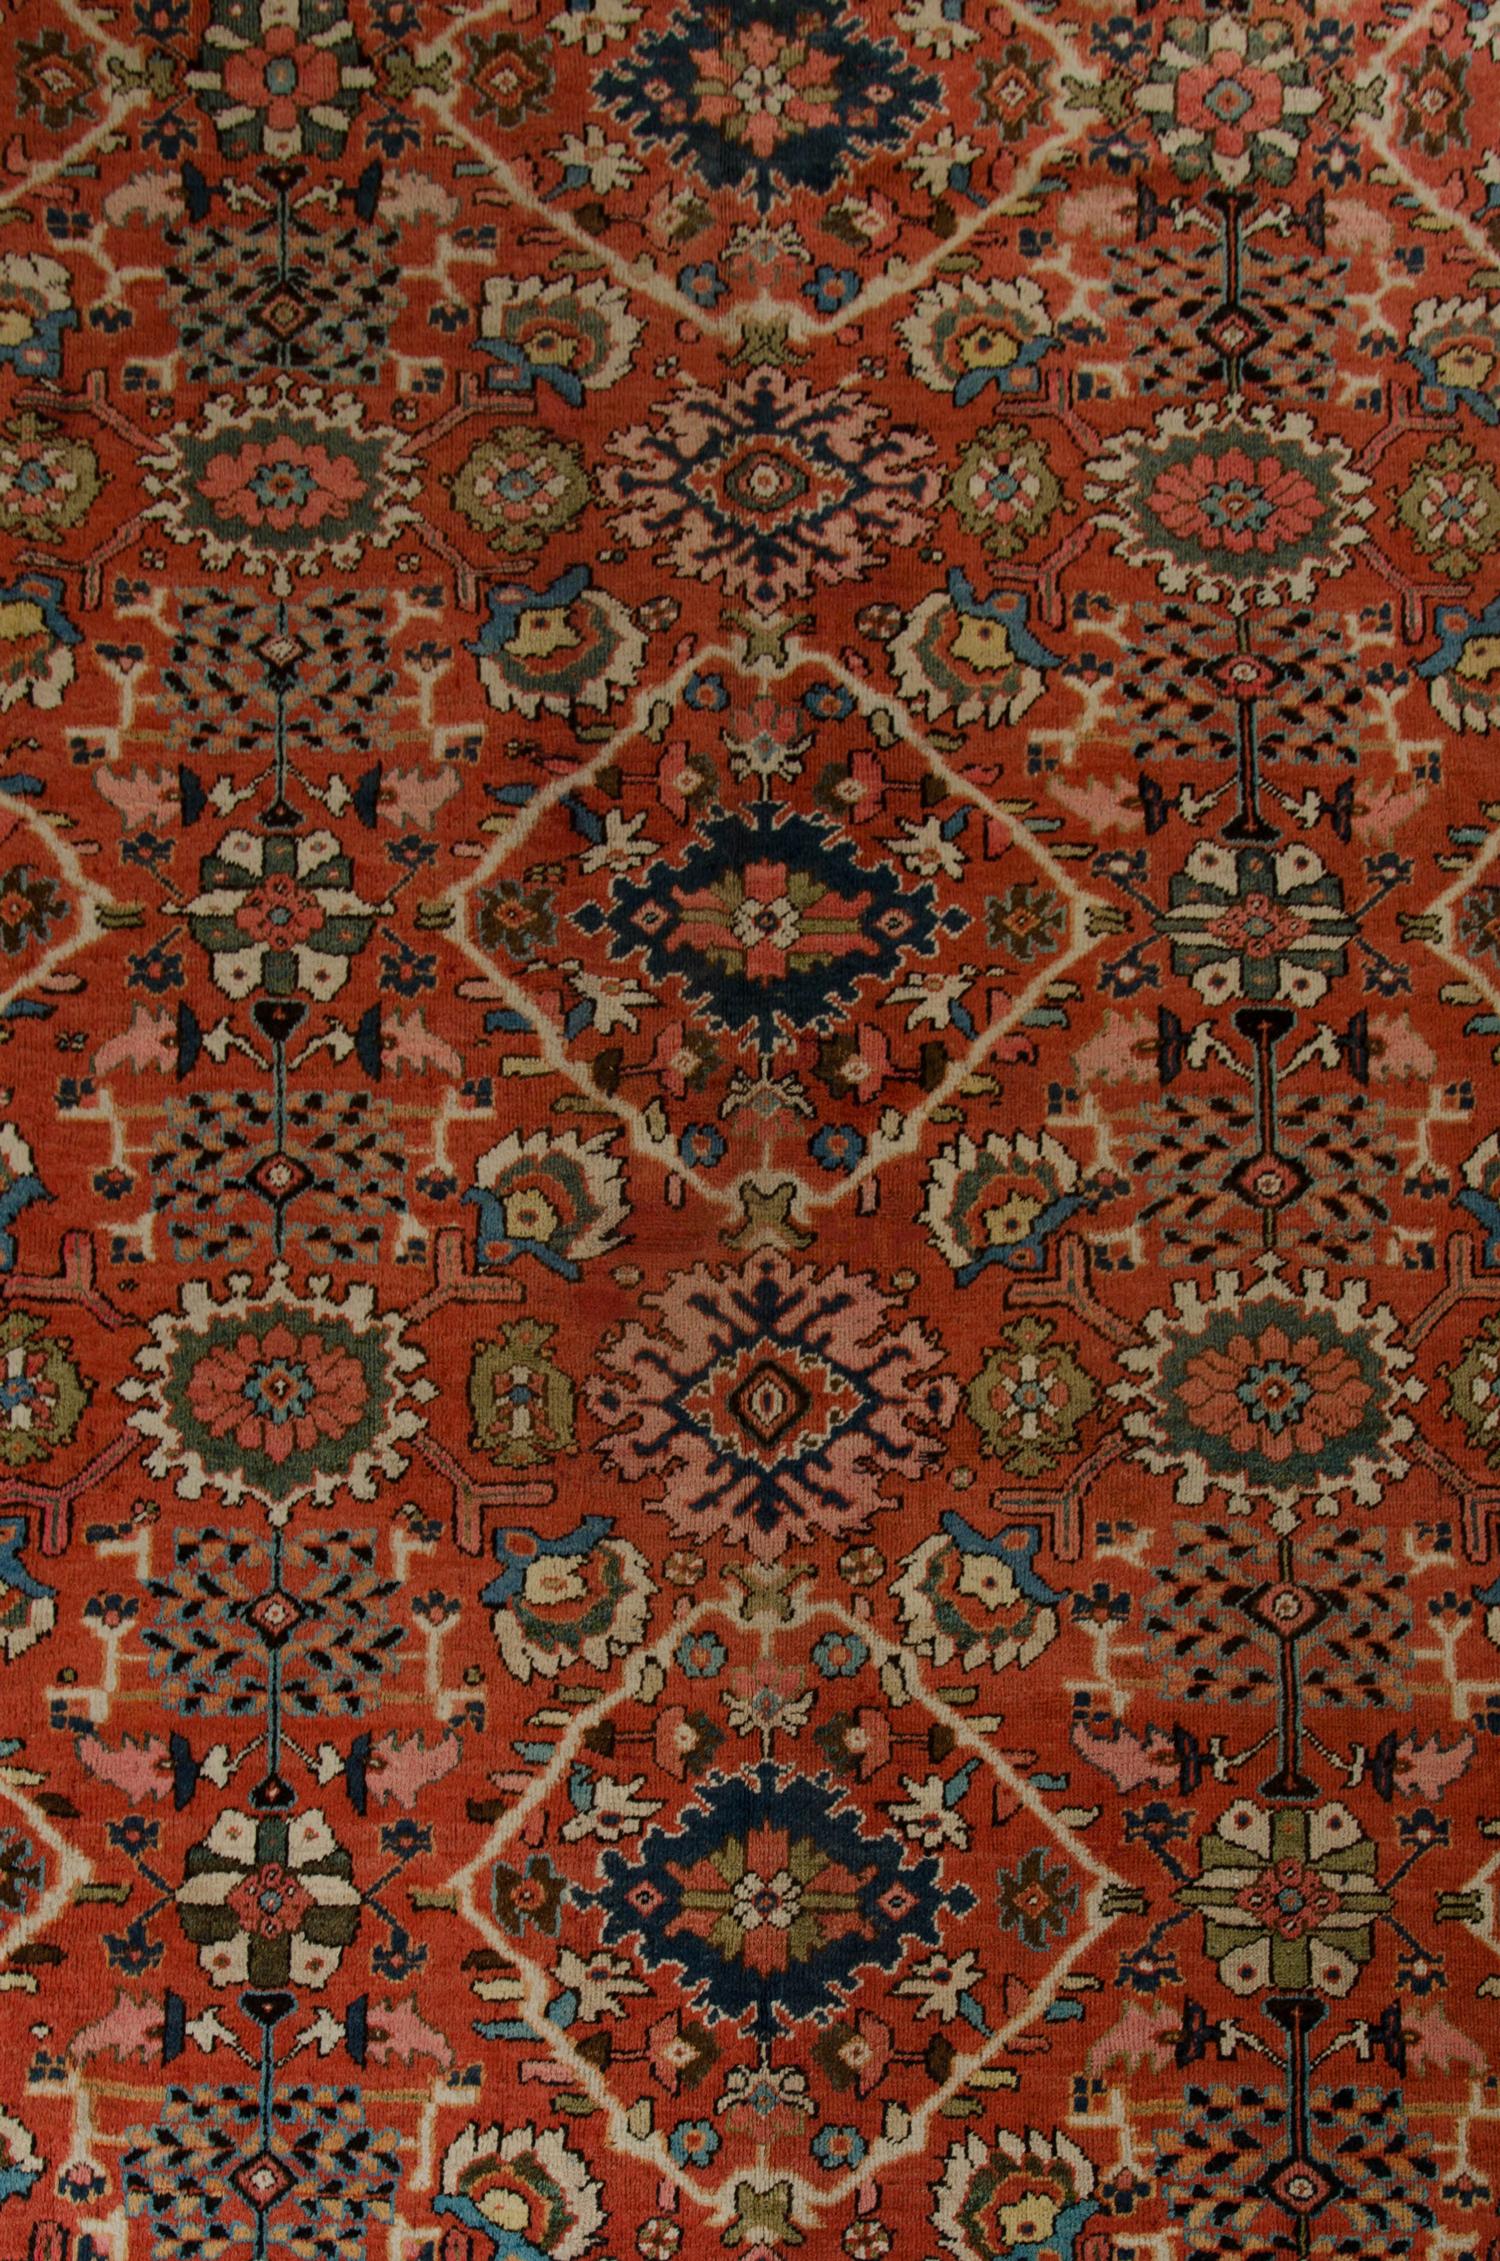 This antique rug was handwoven with muted red-orange and beige tones. With accent colours of blue and green. The design features a symmetrical motif pattern through the centre. A highly detailed repeat pattern border encloses this. Suitable for both